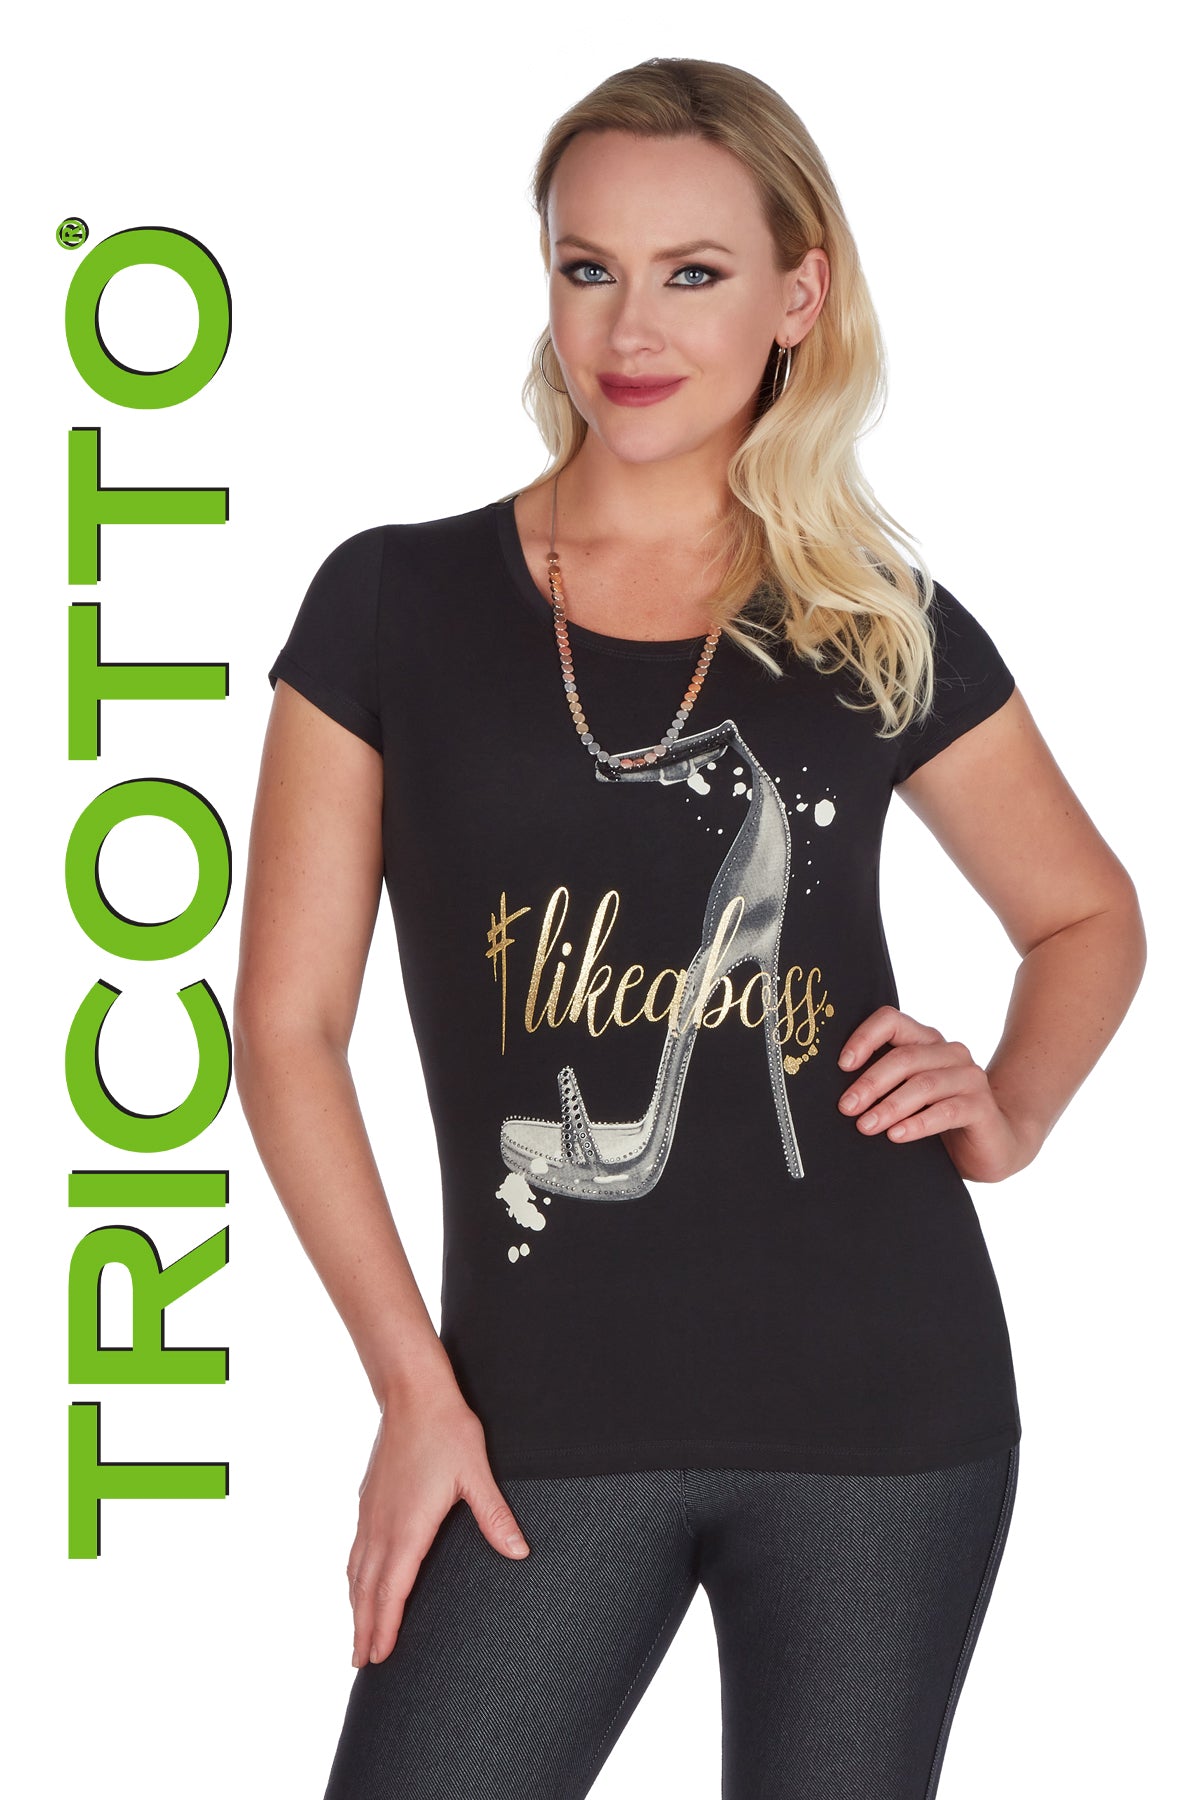 Tricotto T-shirts-Buy Tricotto T-shirts Online-Tricotto Printemps 2022-Tricotto Clothing Quebec-Tricotto Clothing Montreal-Tricotto Jeans